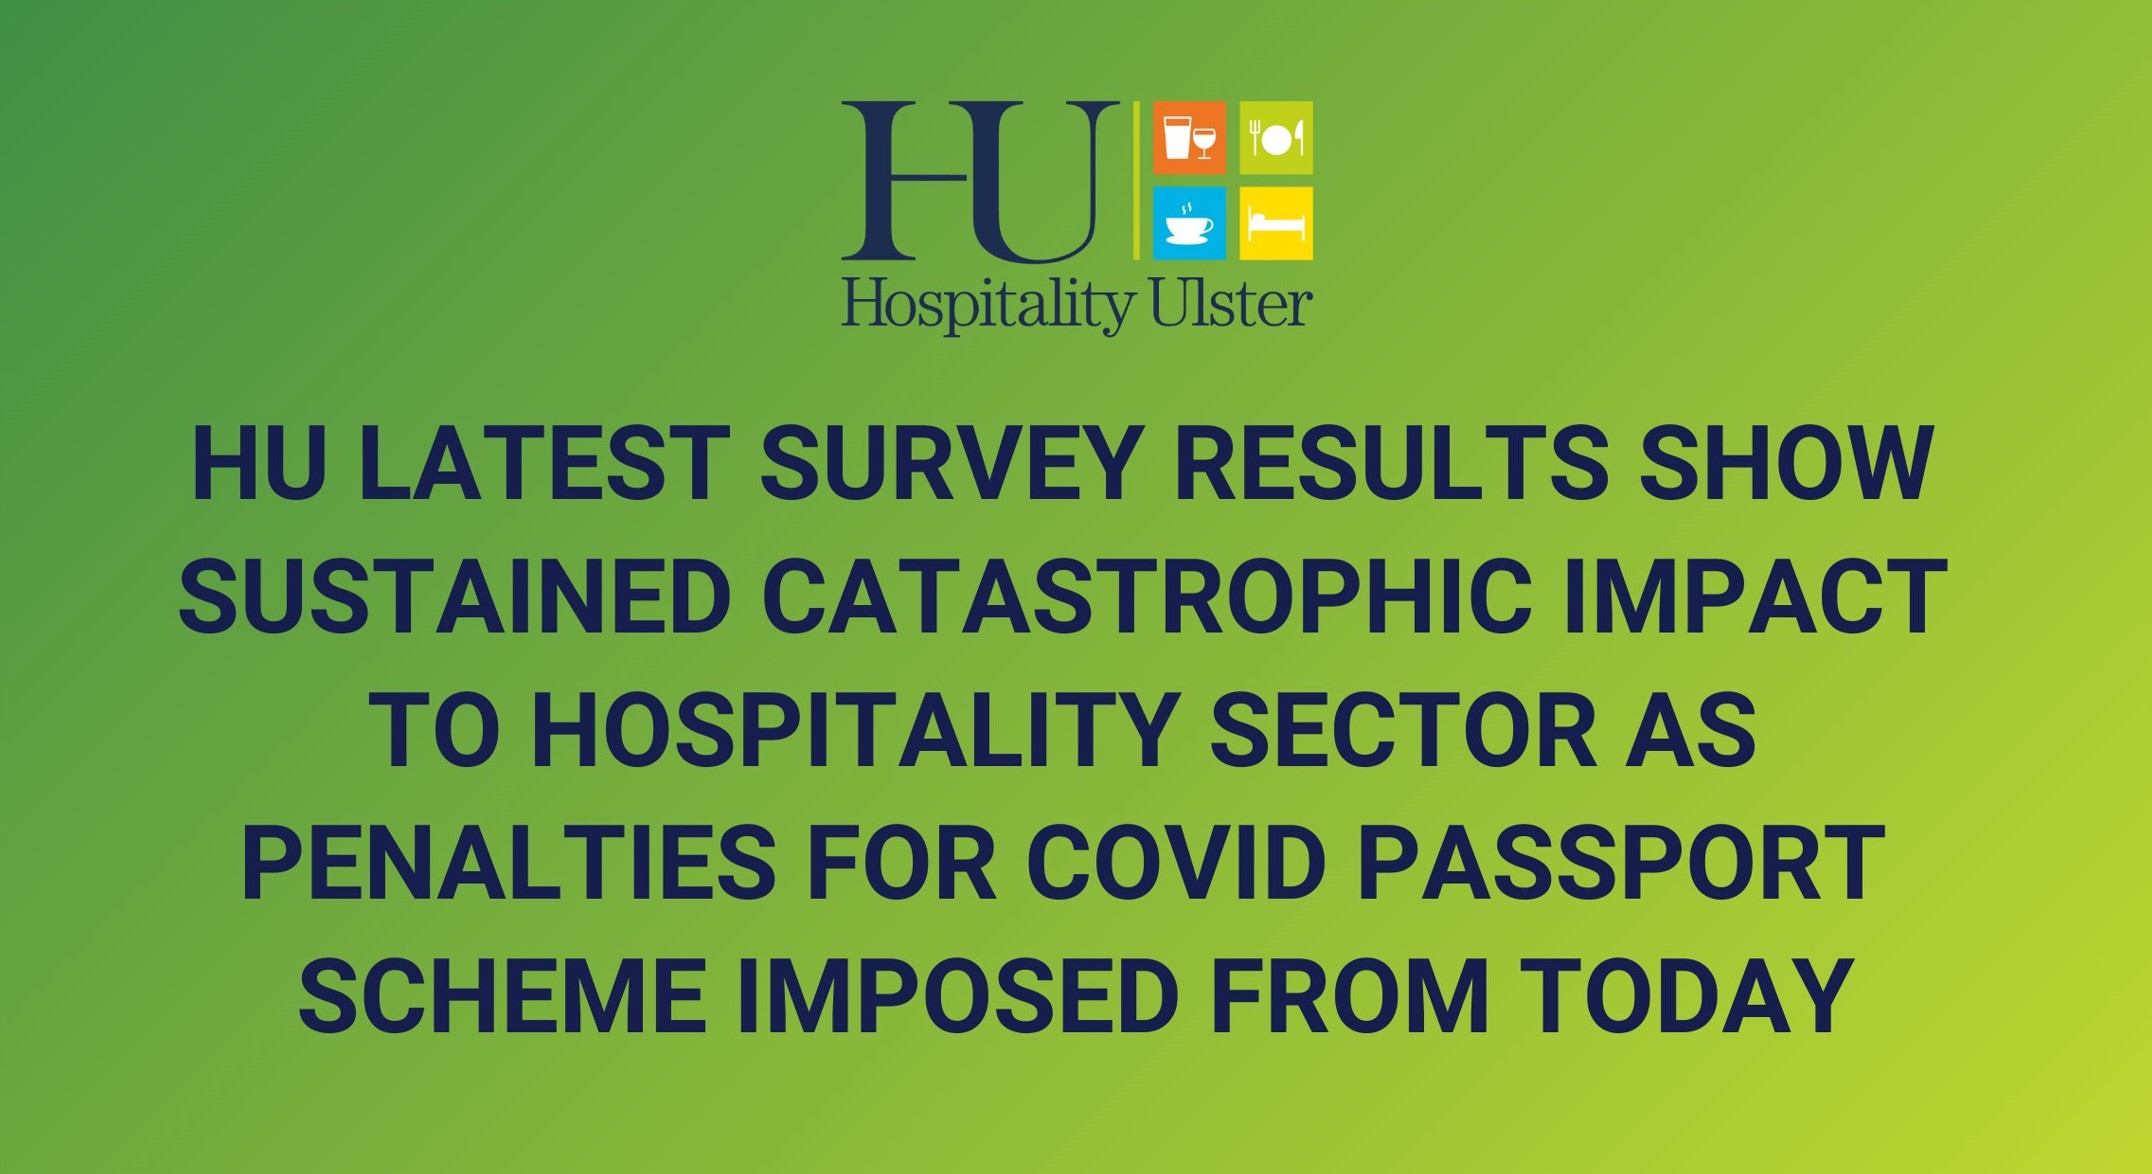 SURVEY SHOWS SUSTAINED CATASTROPHIC IMPACT TO SECTOR AS COVID PASS PENALTIES IMPOSED FROM TODAY